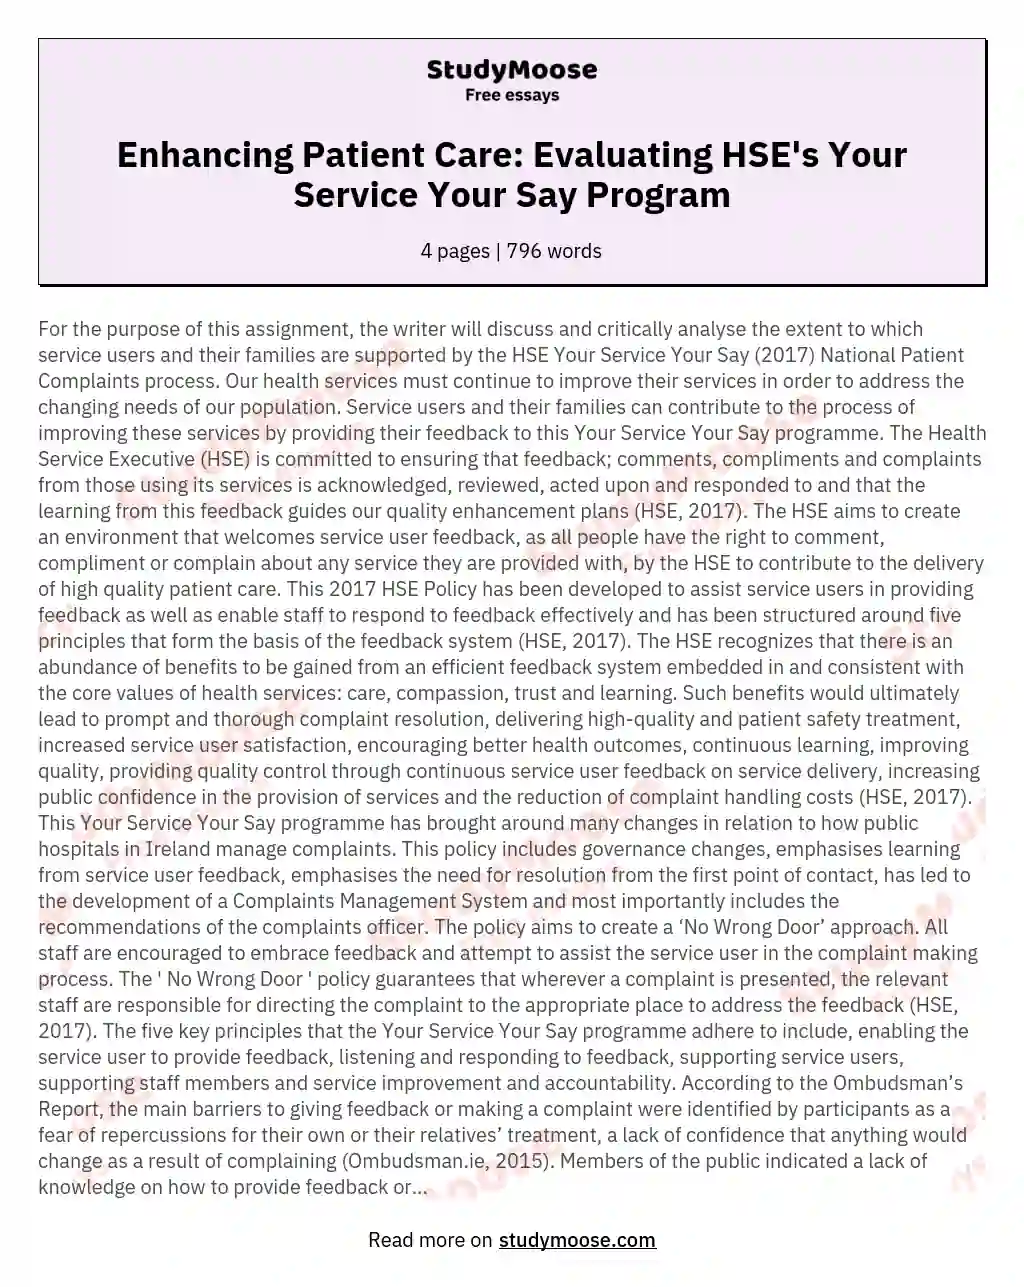 Enhancing Patient Care: Evaluating HSE's Your Service Your Say Program essay